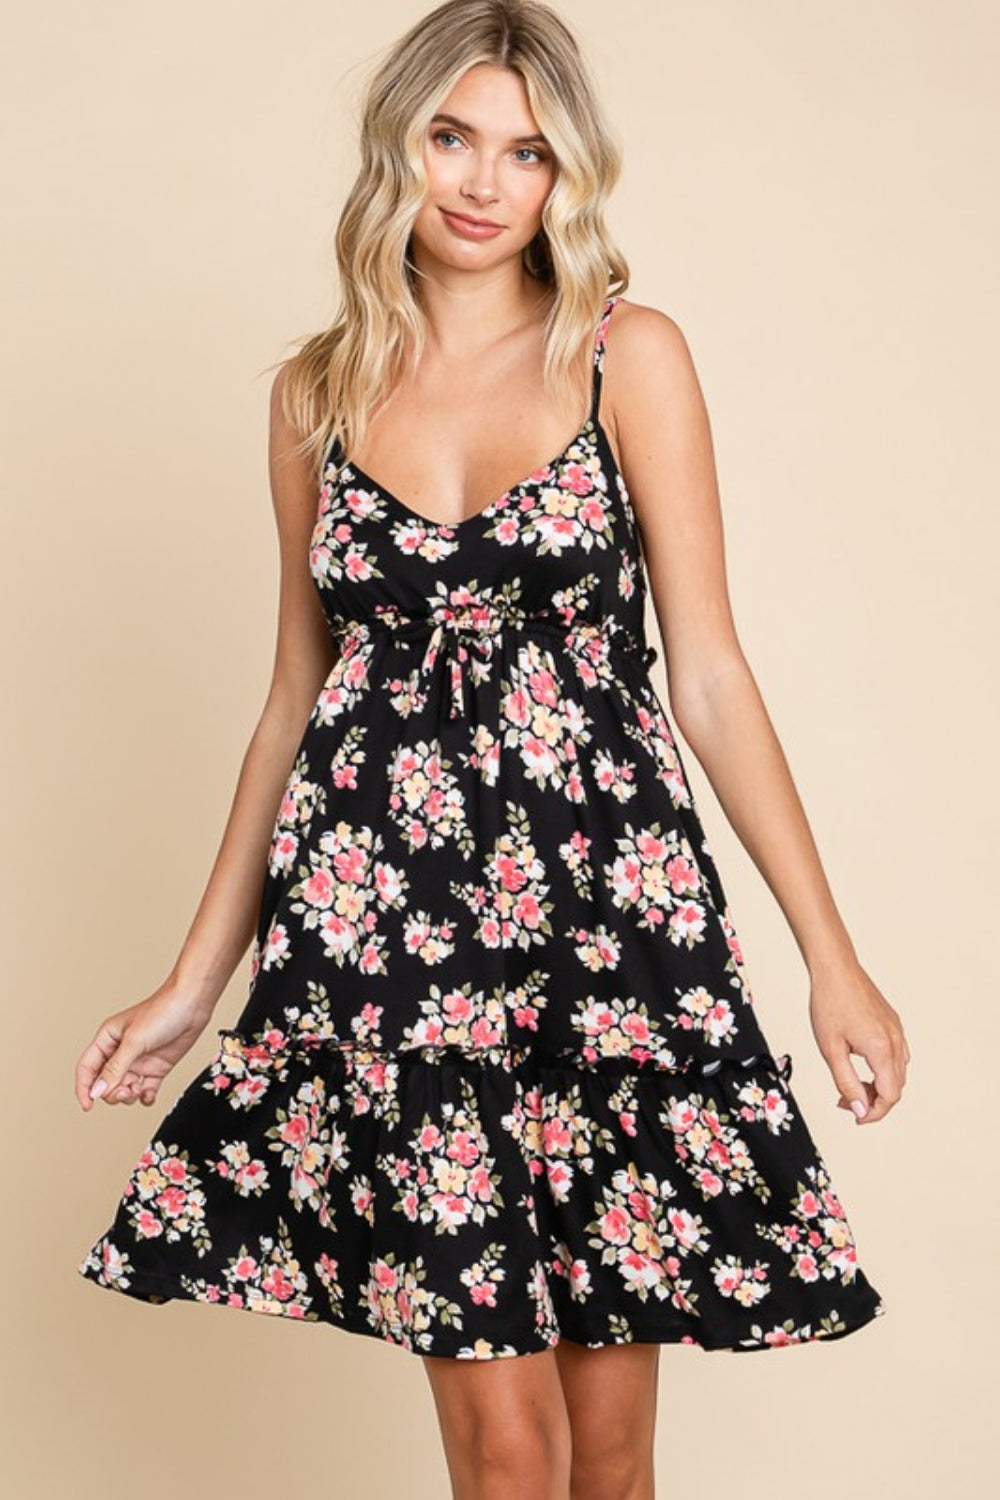 Culture Code Full Size Floral Frill Cami Dress - Tigbul's Variety Fashion Shop